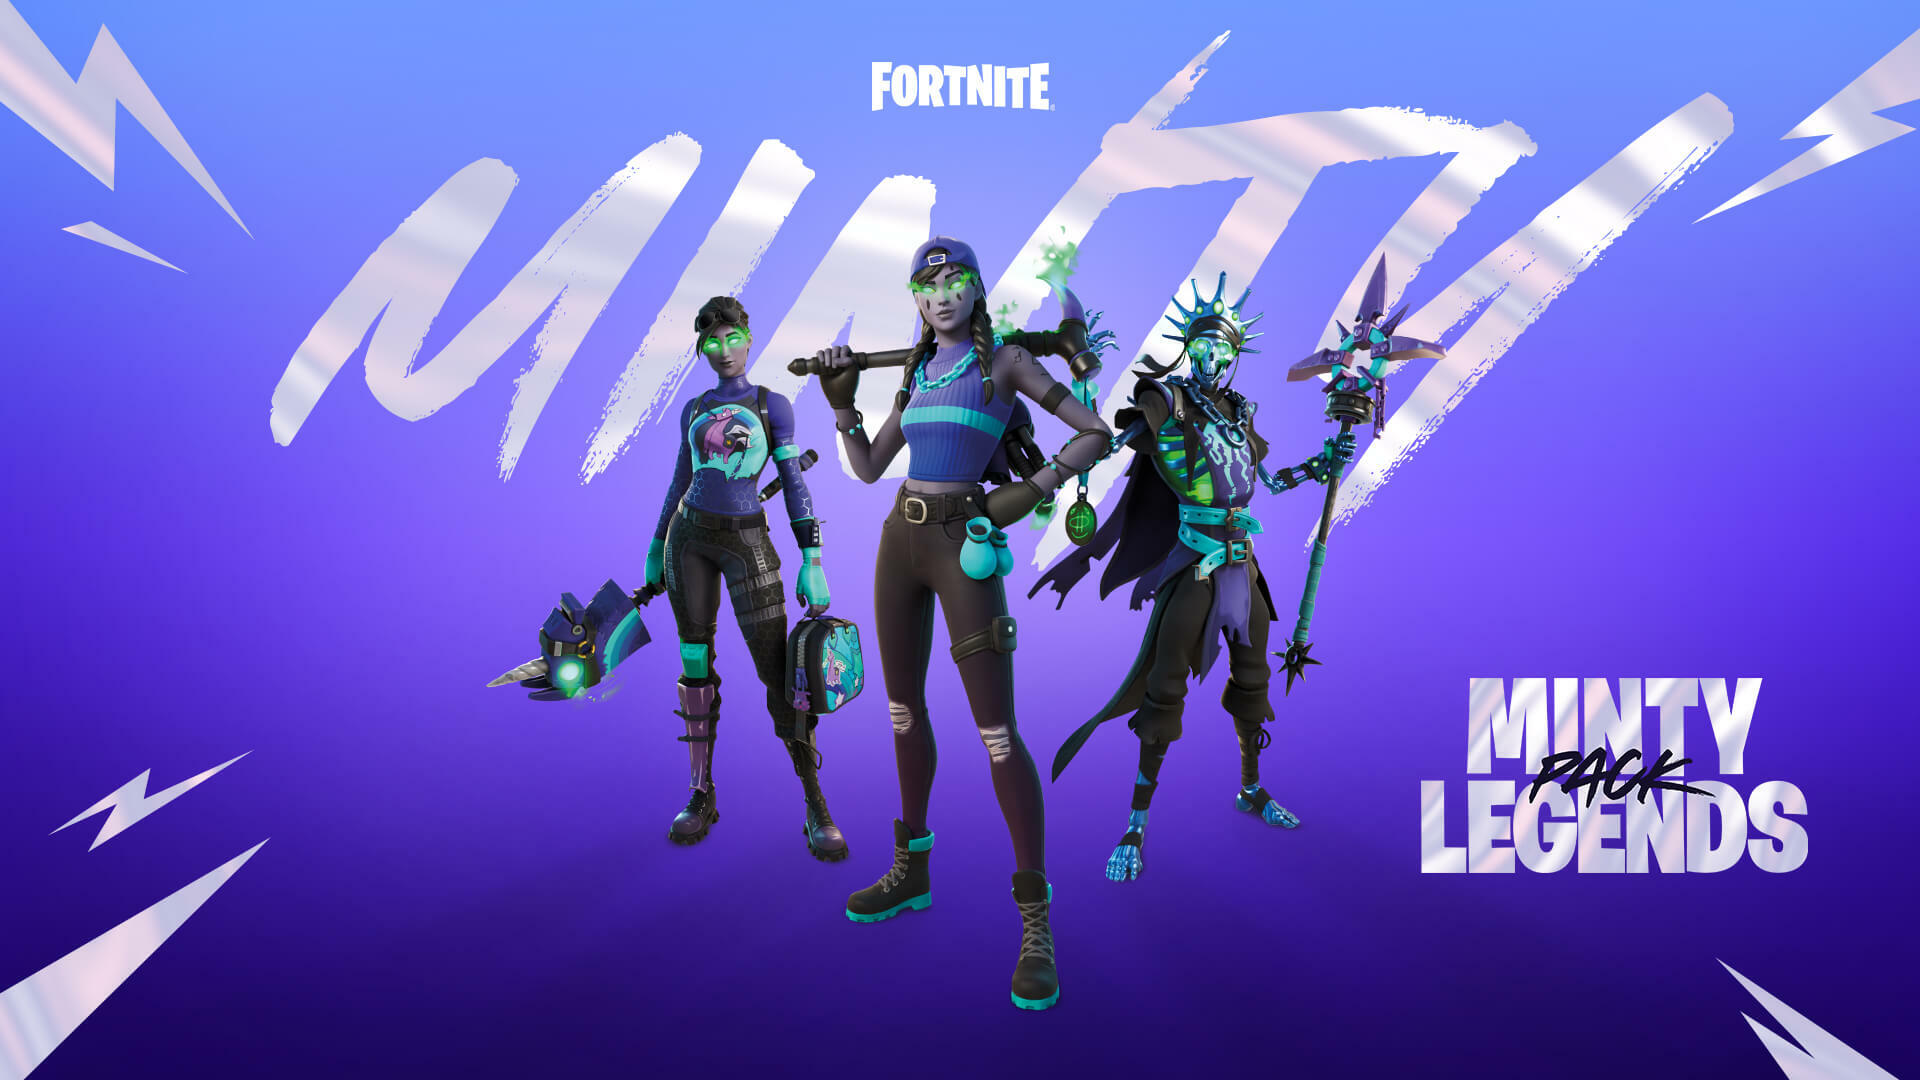 Fortnite Minty Legends Pack Debuts This Fall - GameSpot